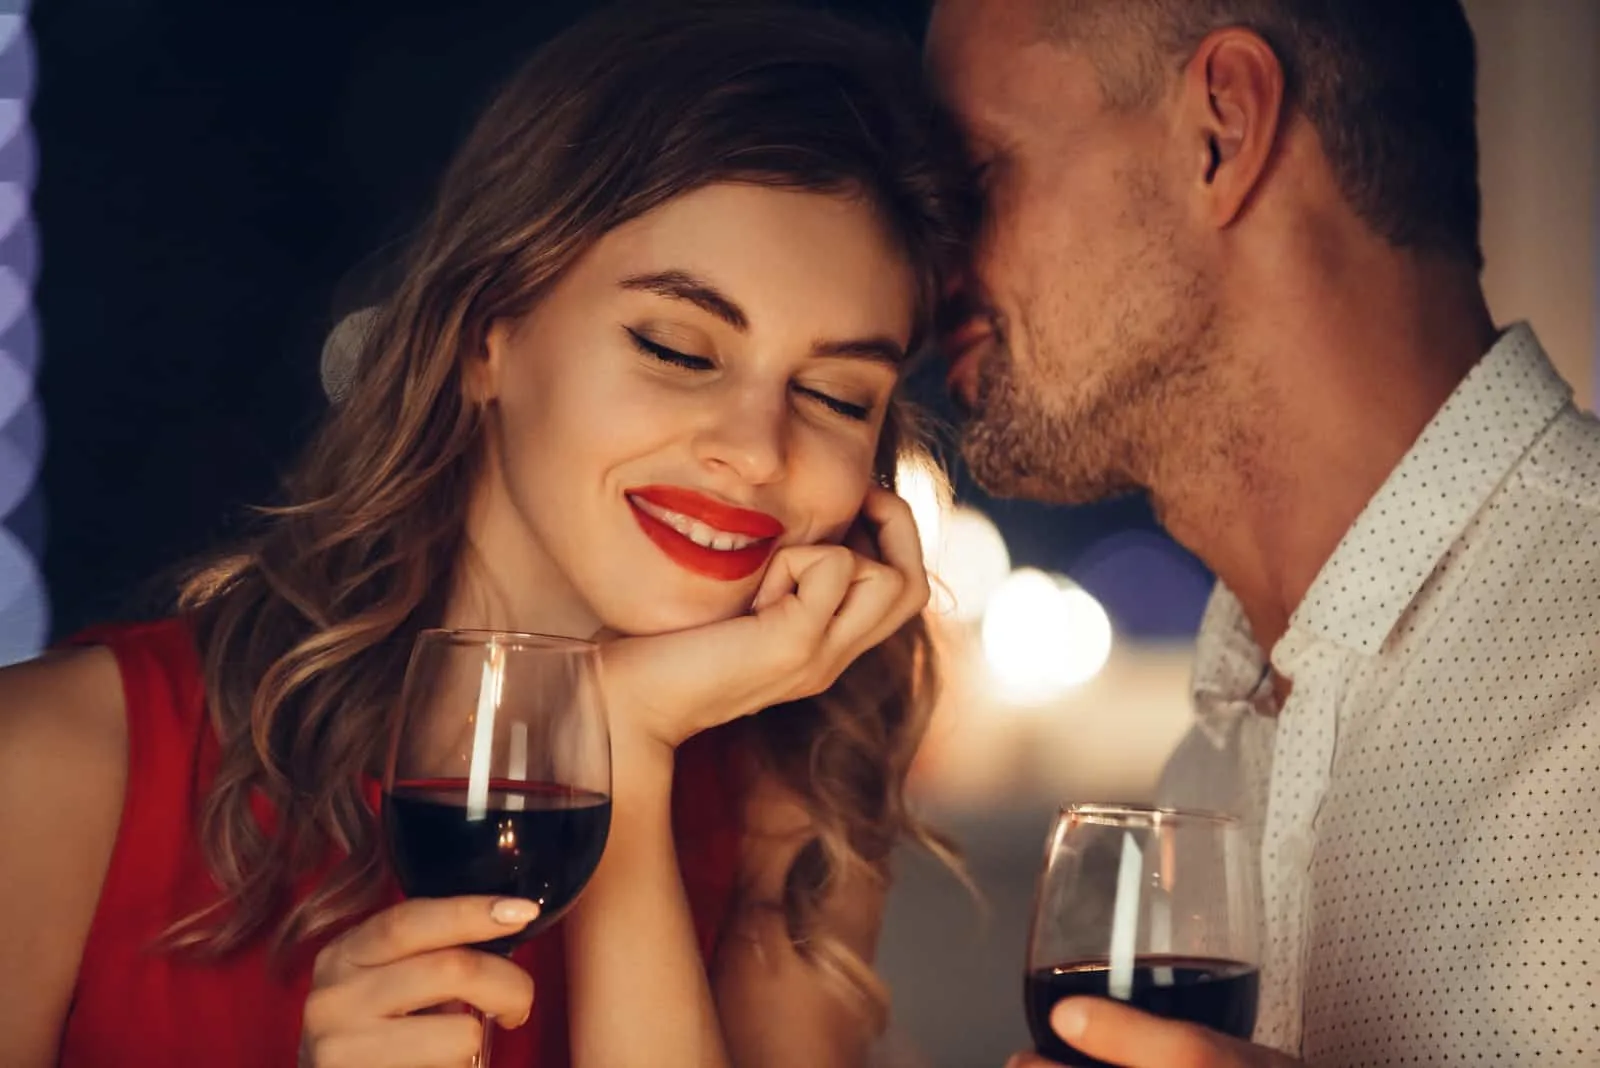 a man whispers in a woman's ear while drinking wine